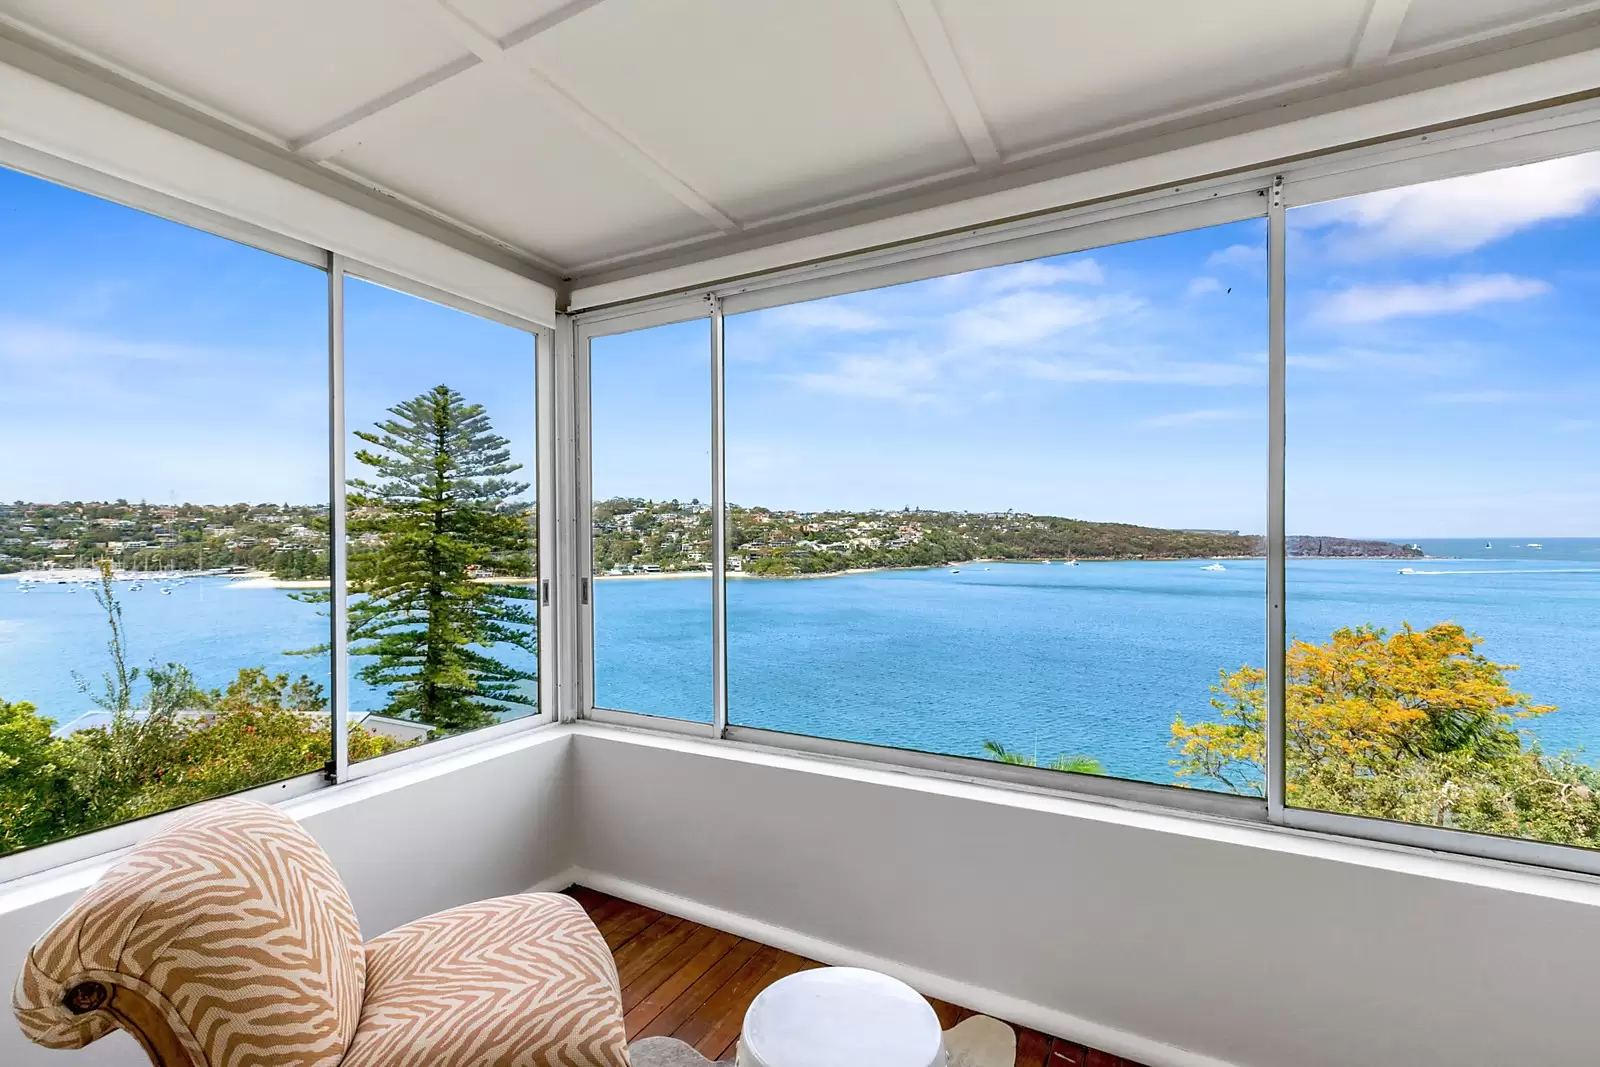 Photo #12: 51 Parriwi Road, Mosman - Sold by Sydney Sotheby's International Realty